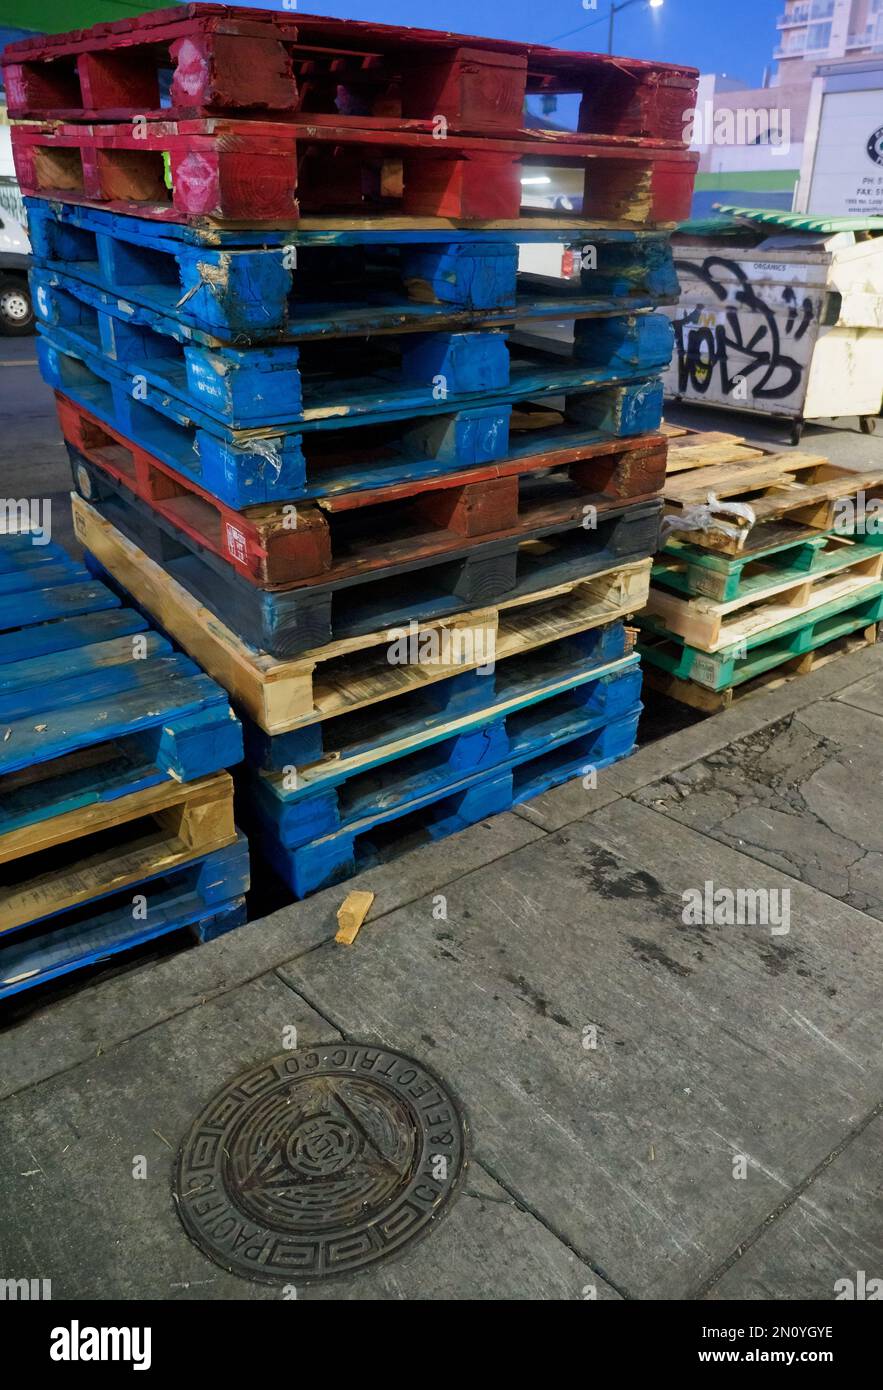 Stack of blue and red and green shipping pallets ready for cargo Stock Photo